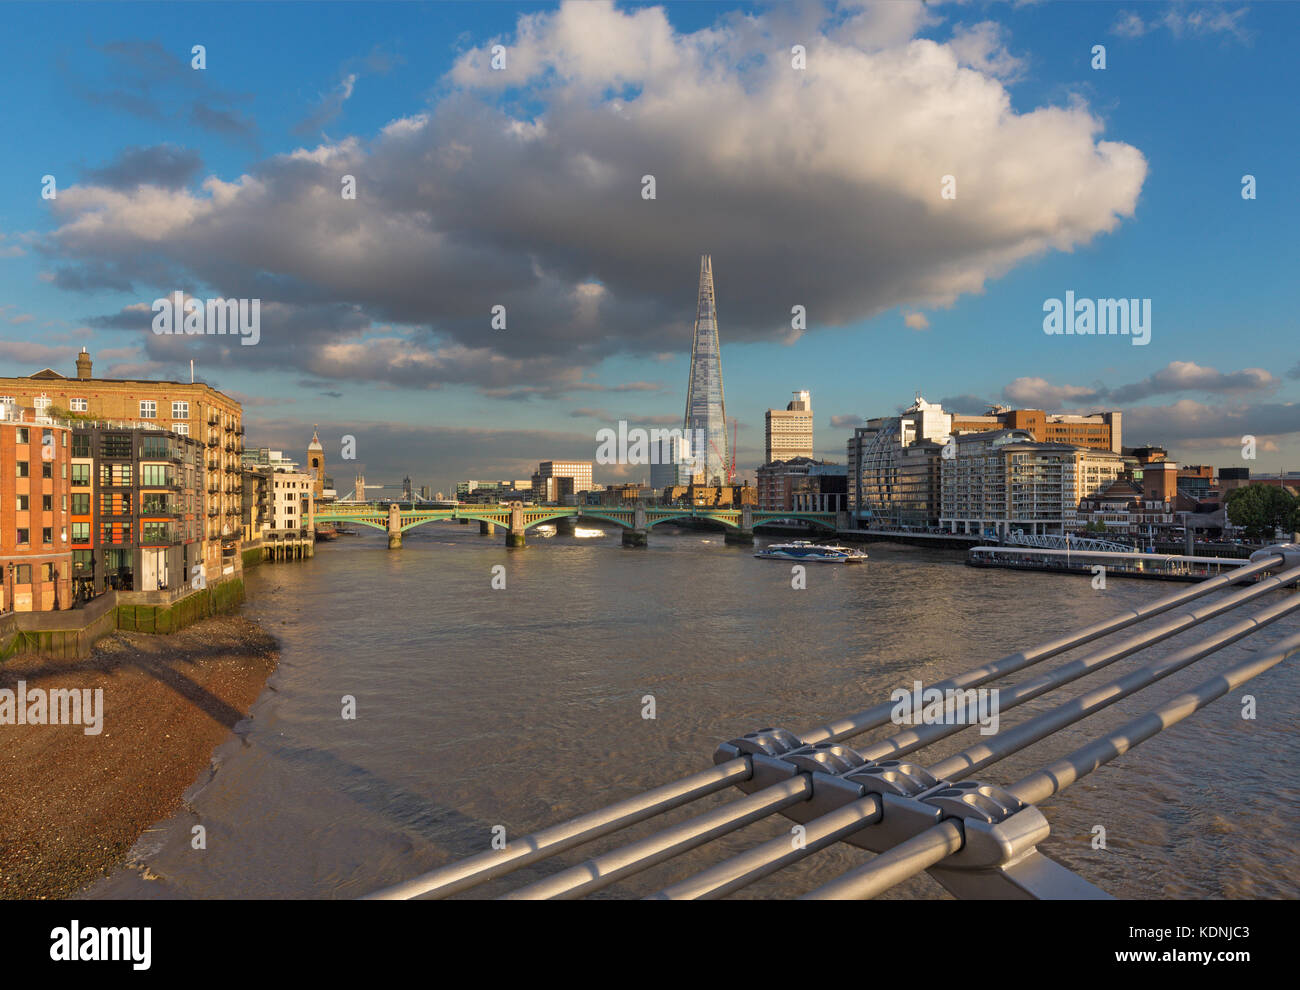 London - The Thames riverside and Shard from Millenium bridge in evening light. Stock Photo